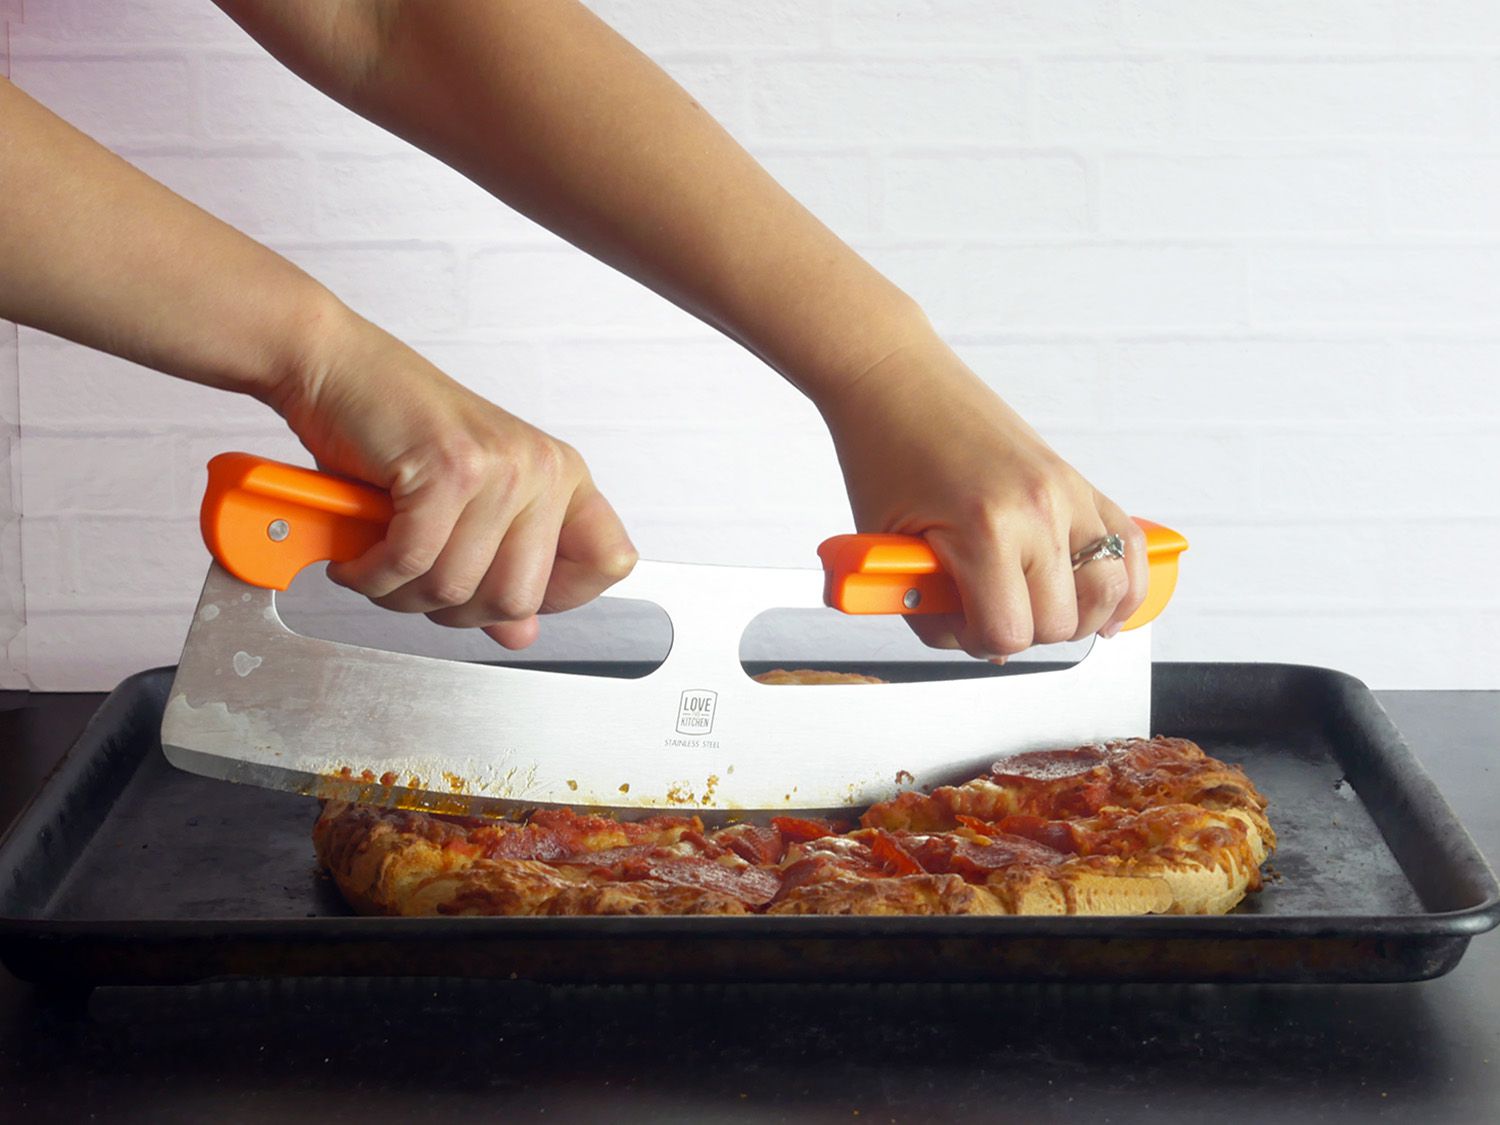 using the original pizza cutter to slice up a pepperoni pizza on a sheet tray